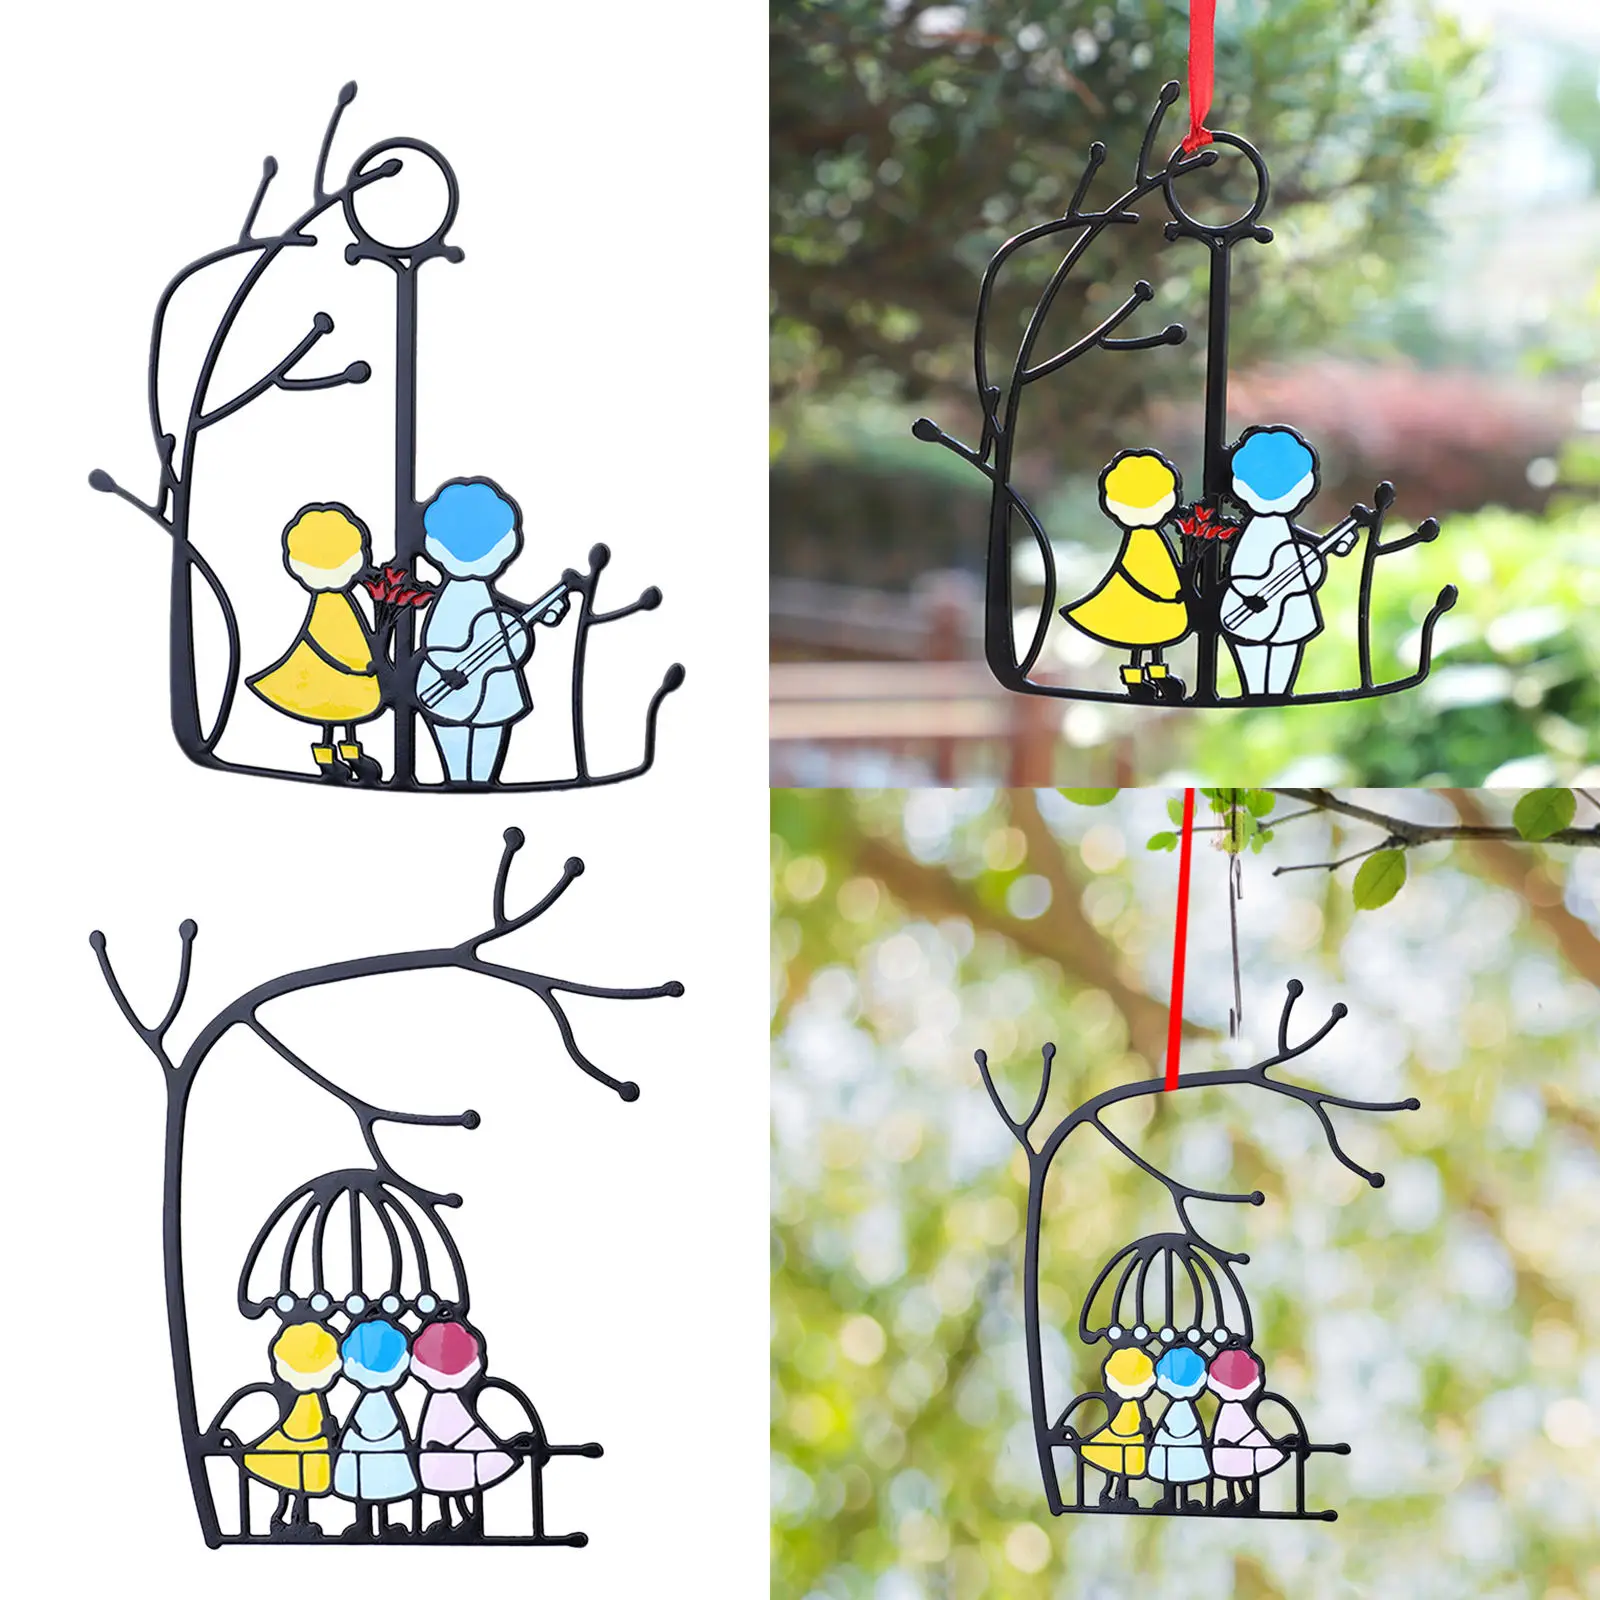 Colorful Cute Stained Glass  Outdoor Garden Decor Pendant Ornament for Garden Outdoor Home Kids Room Window